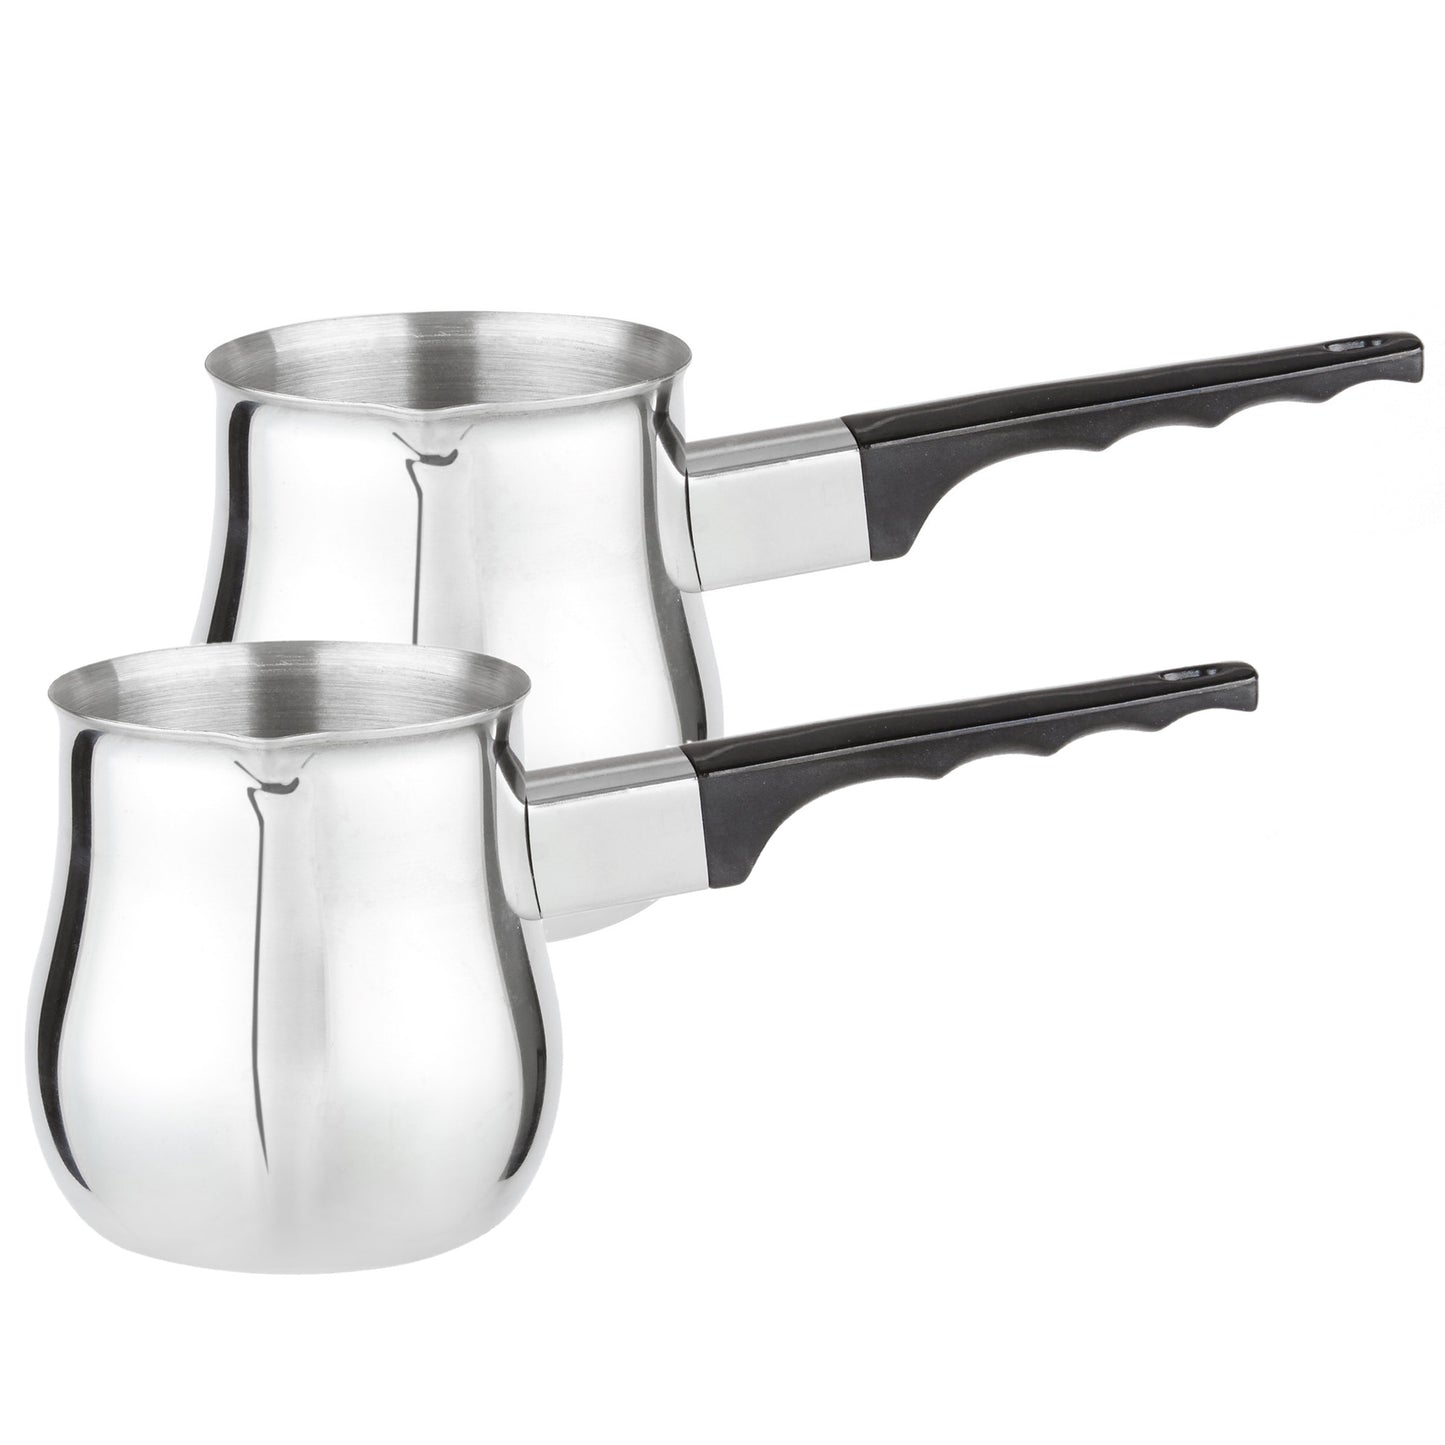 Cuisinox Turkish Cezve Stainless Steel Coffee Pot, available in 2 sizes